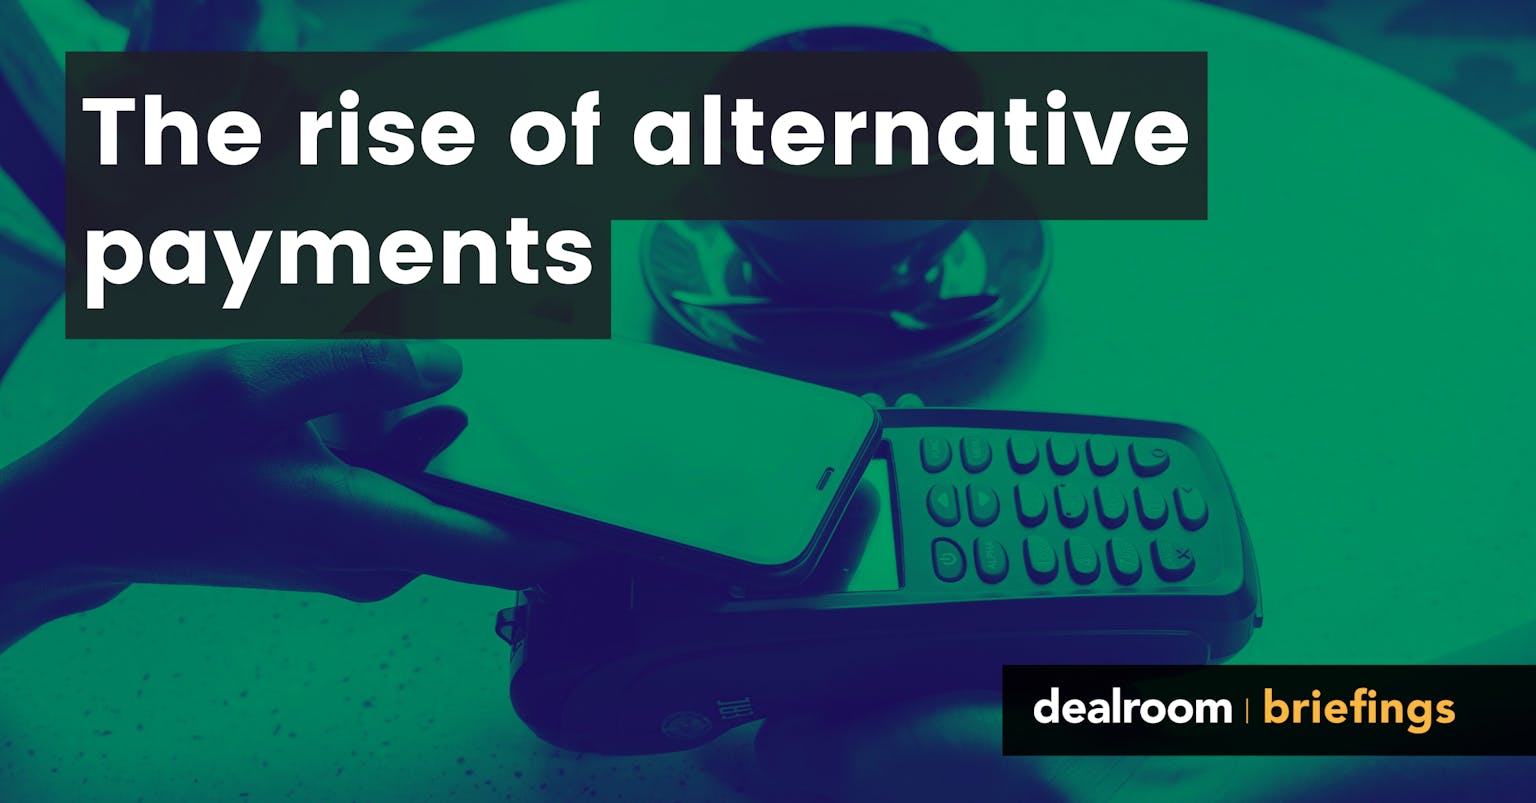 The rise of alternative payments